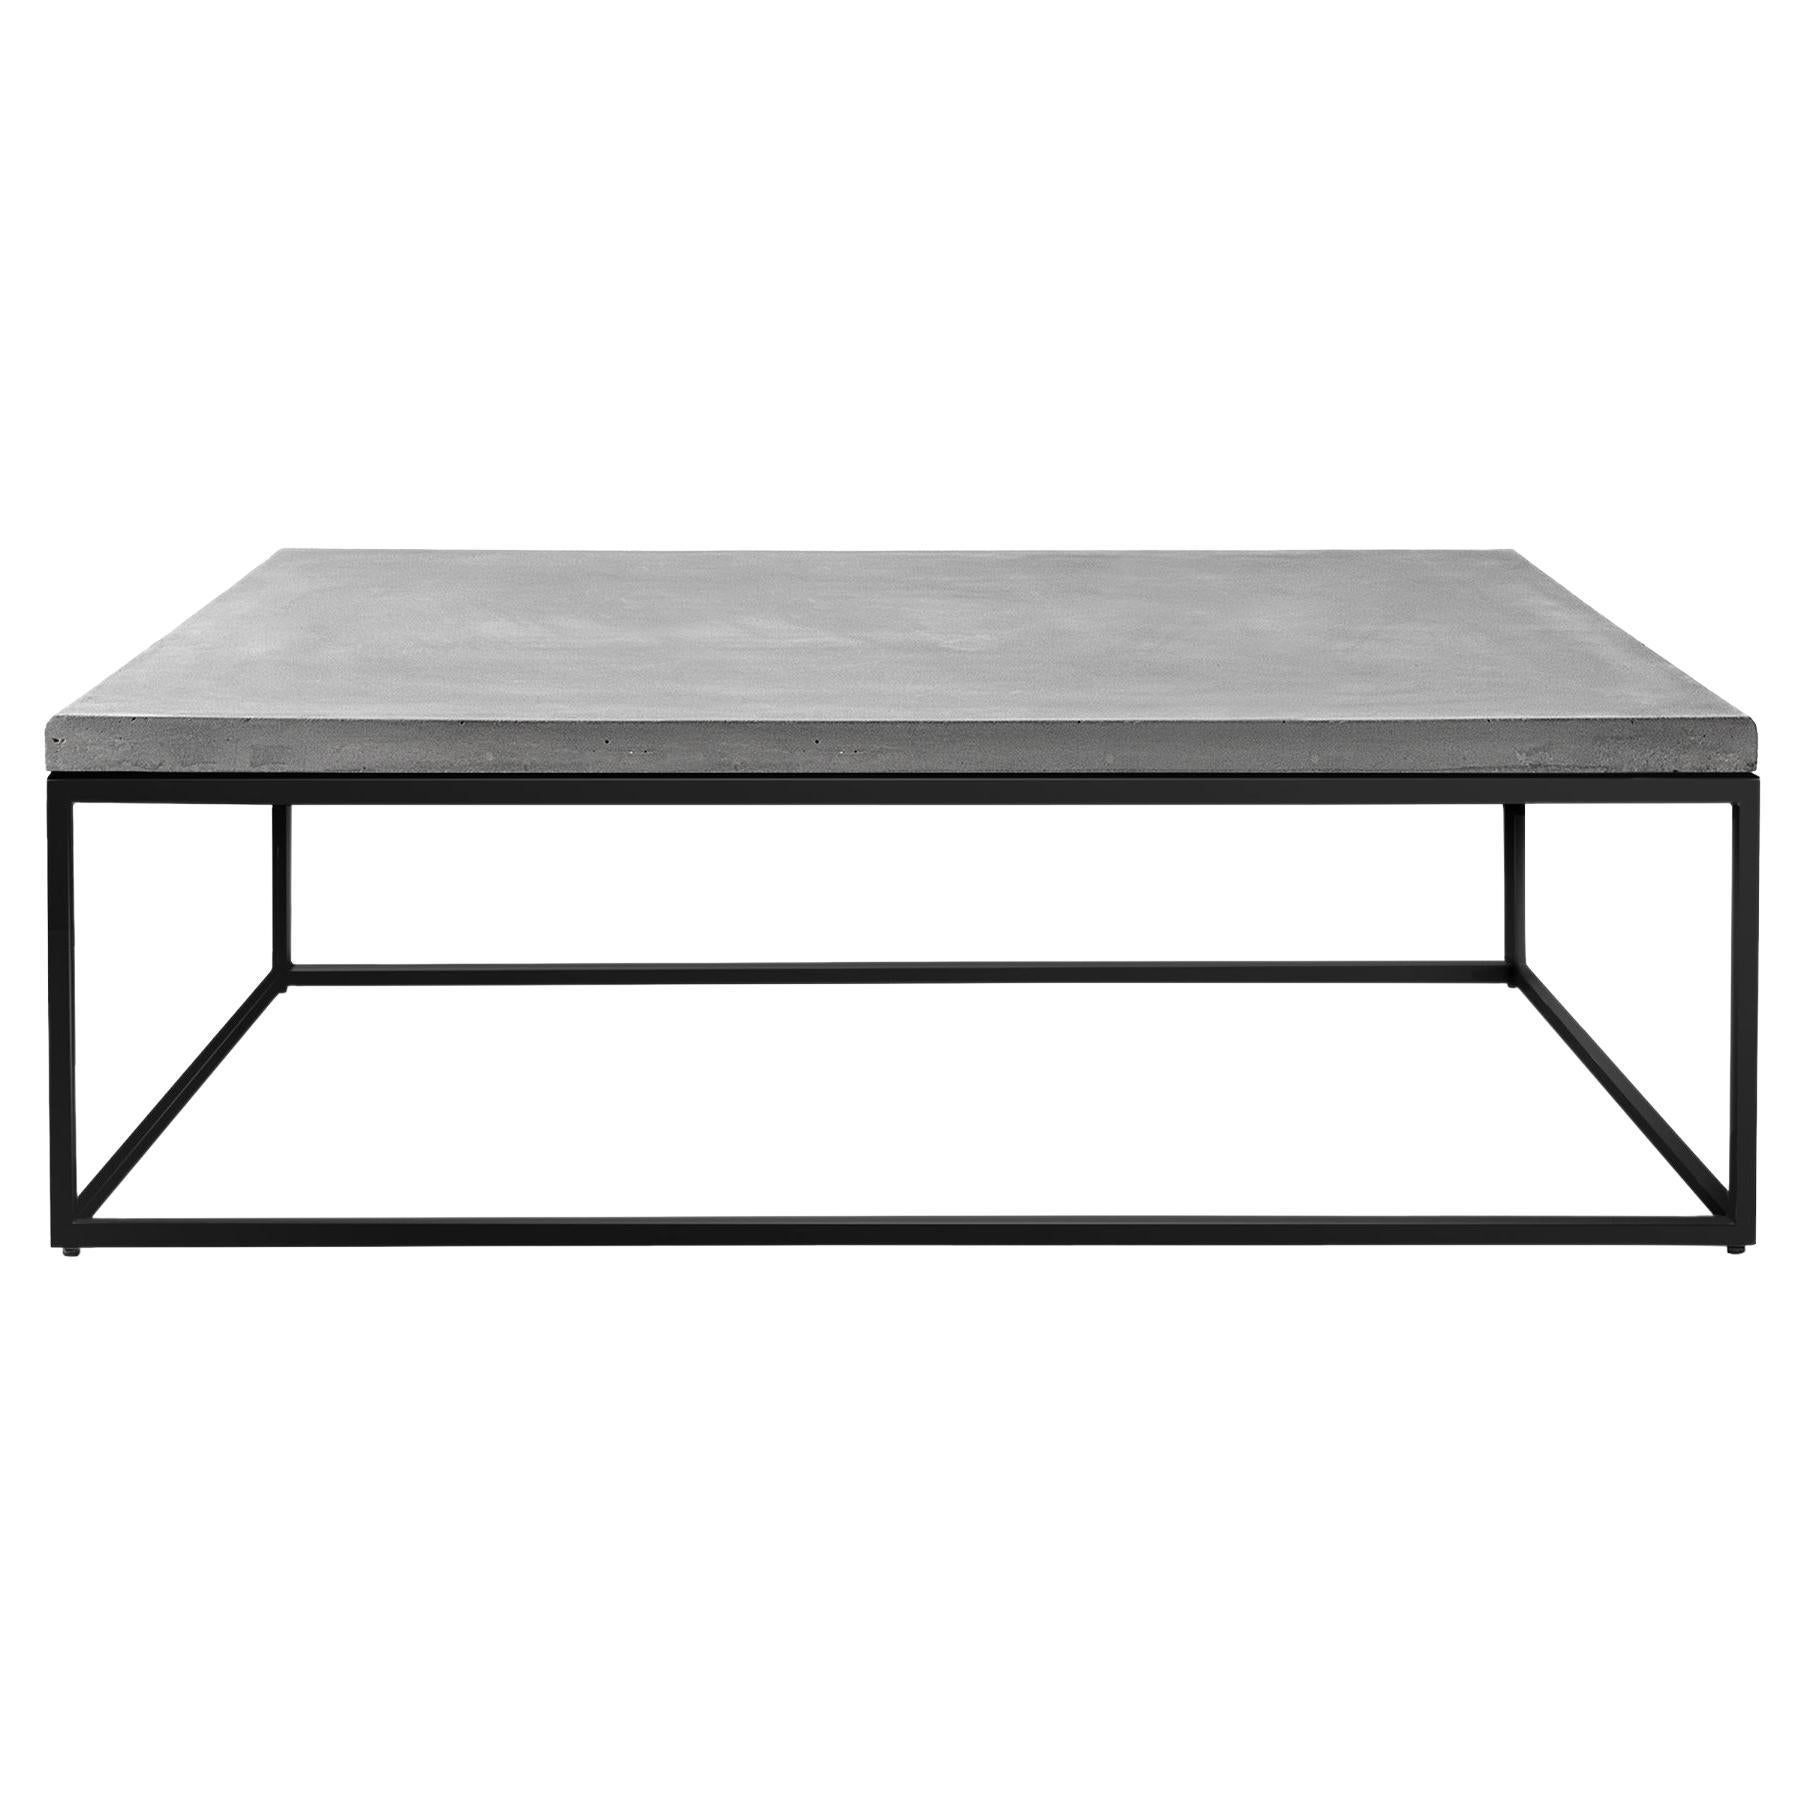 Perspective 1000x1000 Coffee Table Black For Sale